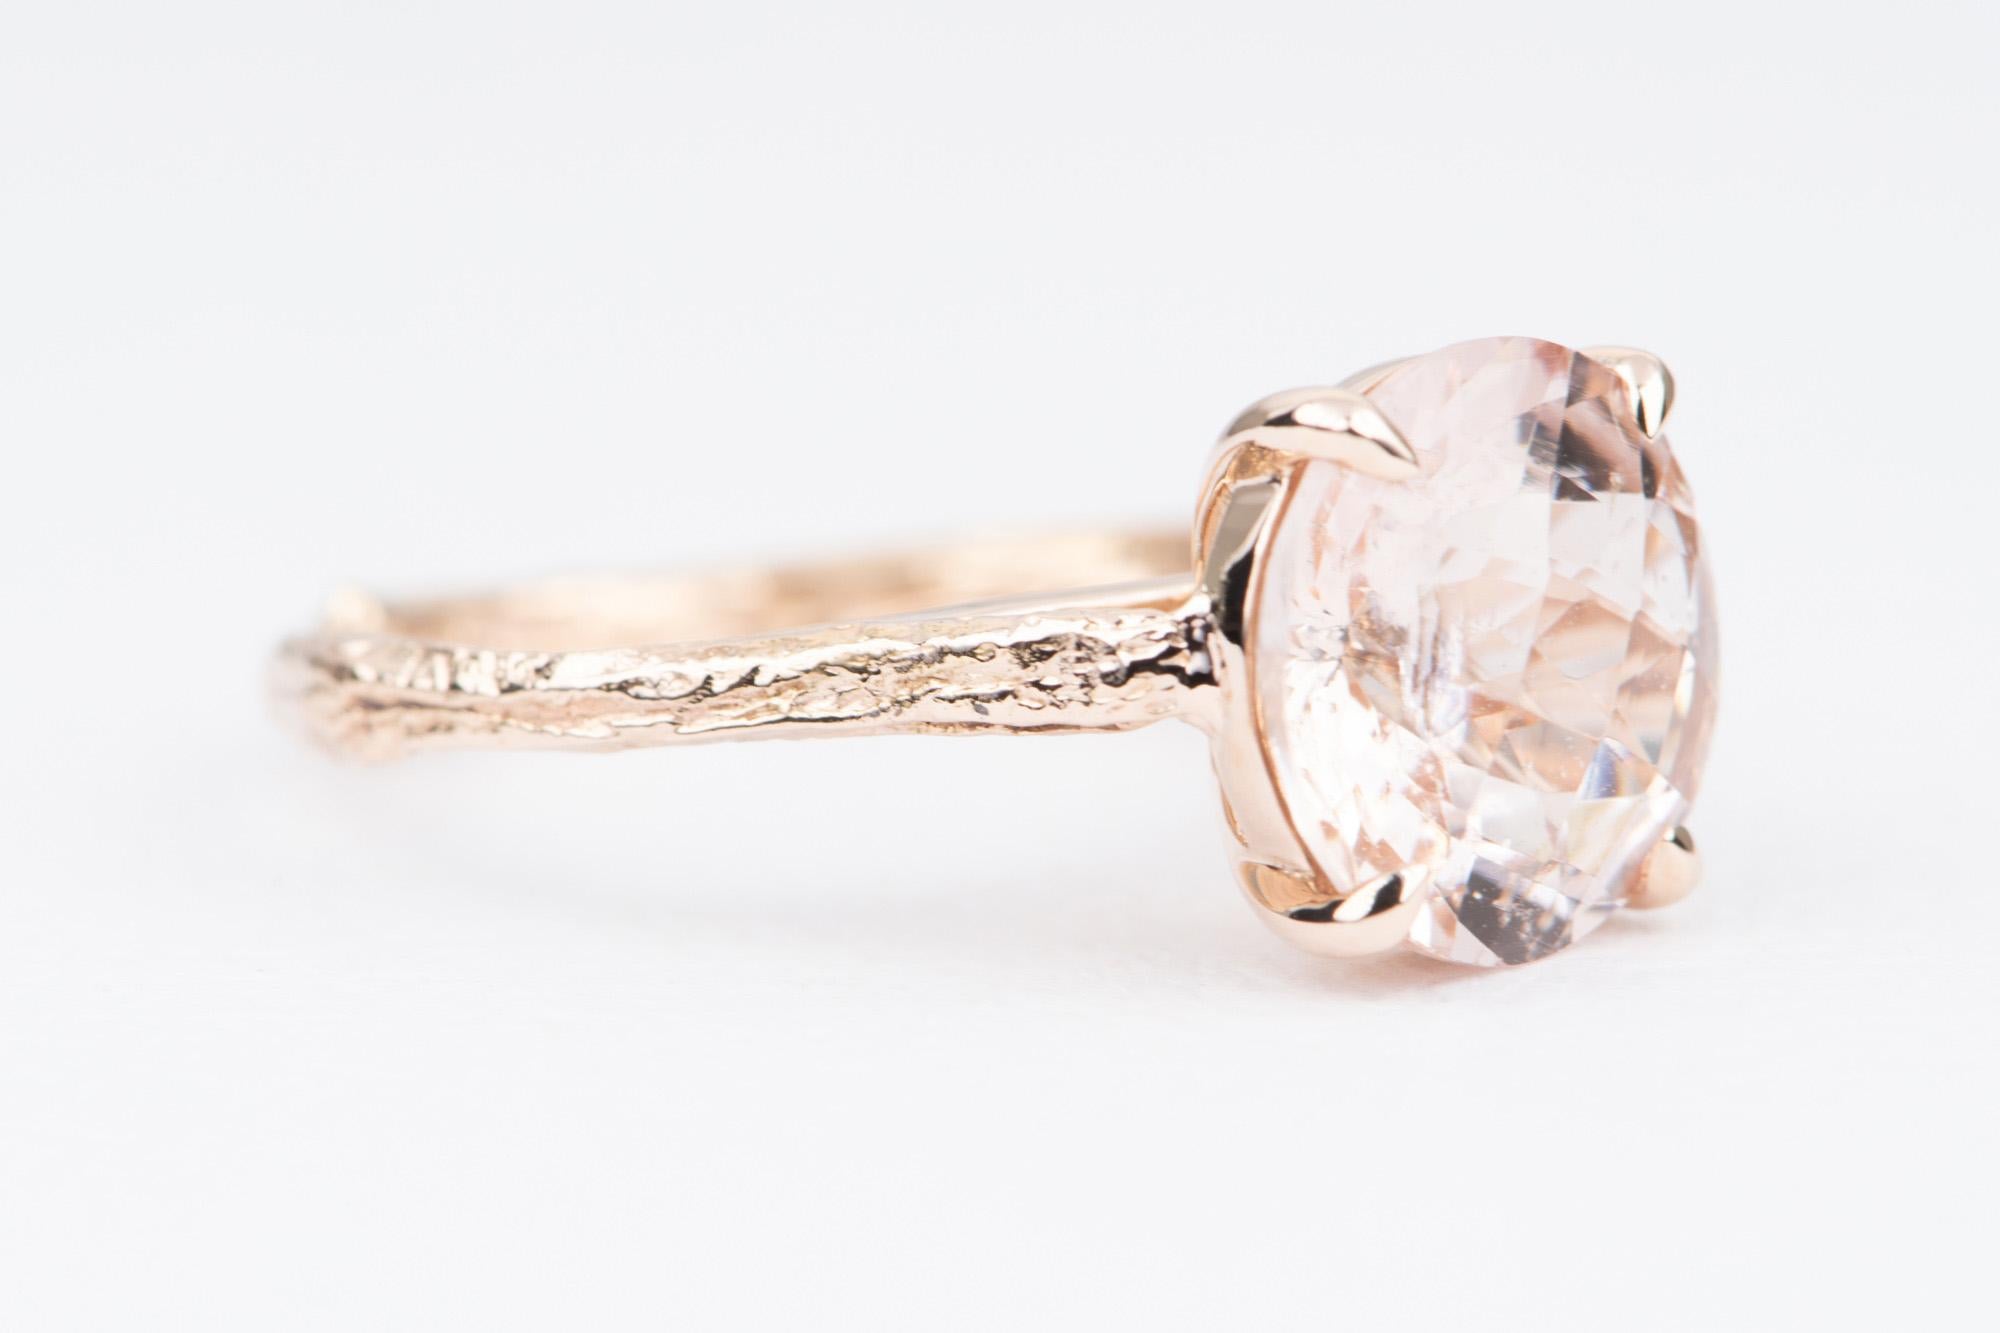 ♥  Solid 14K rose gold band with a light pink morganite set with four prongs
♥  Features a nature inspired, branch-like shank
♥  The morganite has visible inclusions that sparkle and create a nice celestial effect. We are calling this a Galaxy